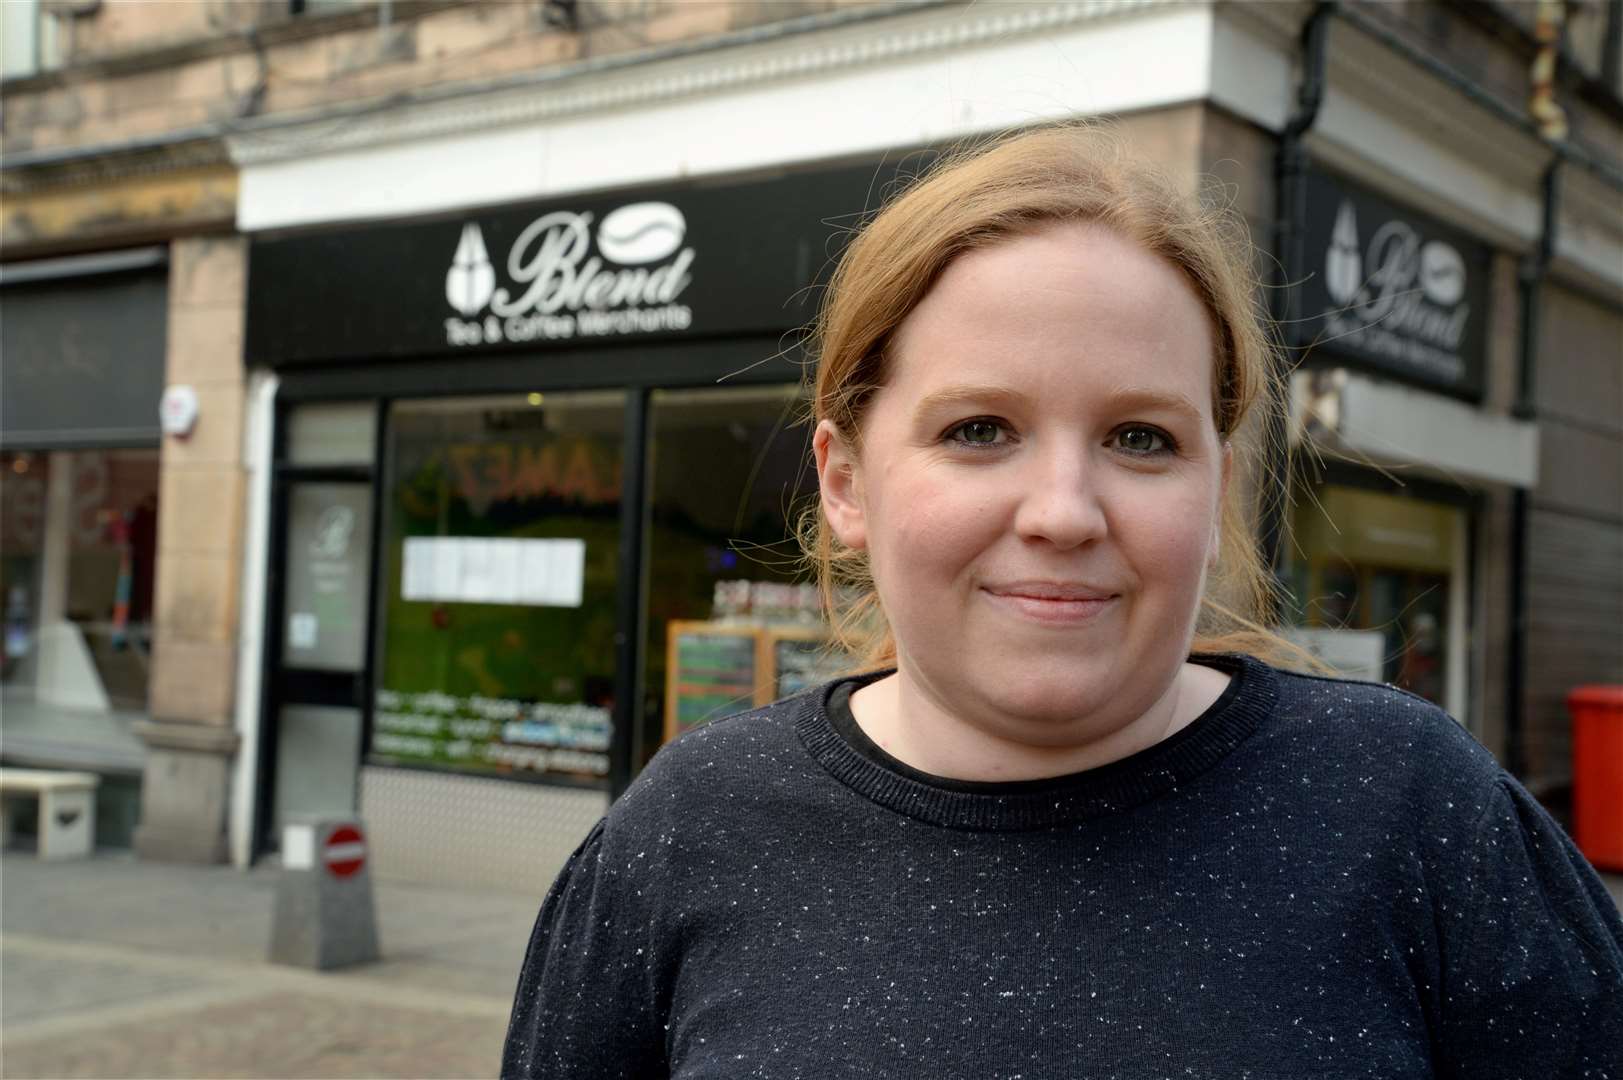 Gemma Taylor owns the Blend coffee shop in Drummond Street.